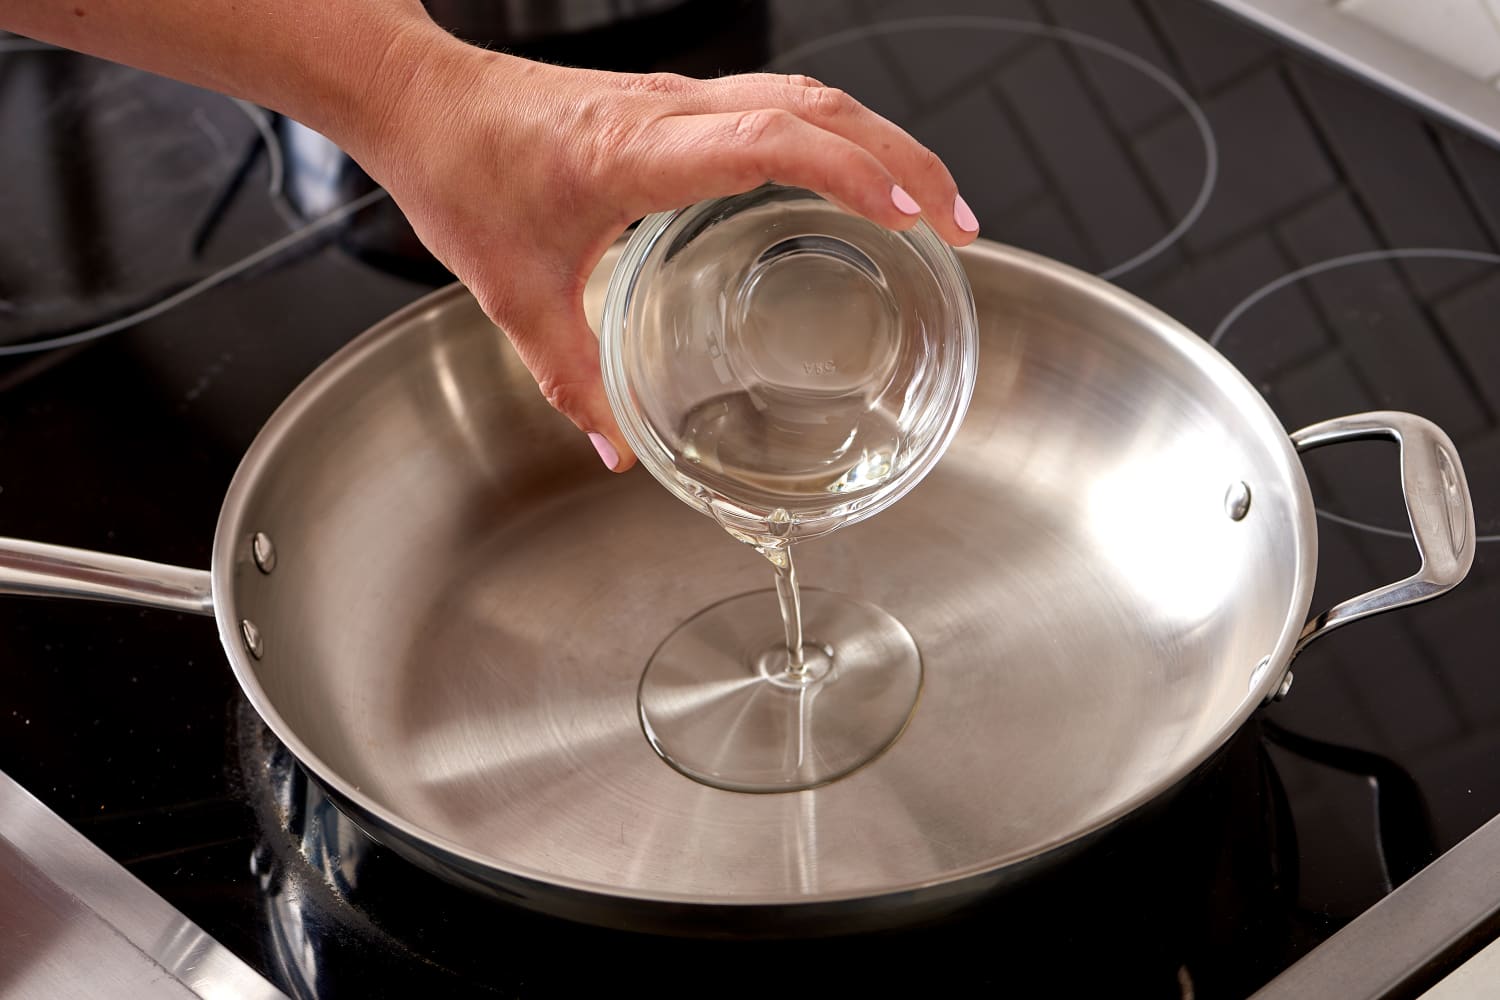 What Kind of Cookware Can You Use for Induction Cooking? 